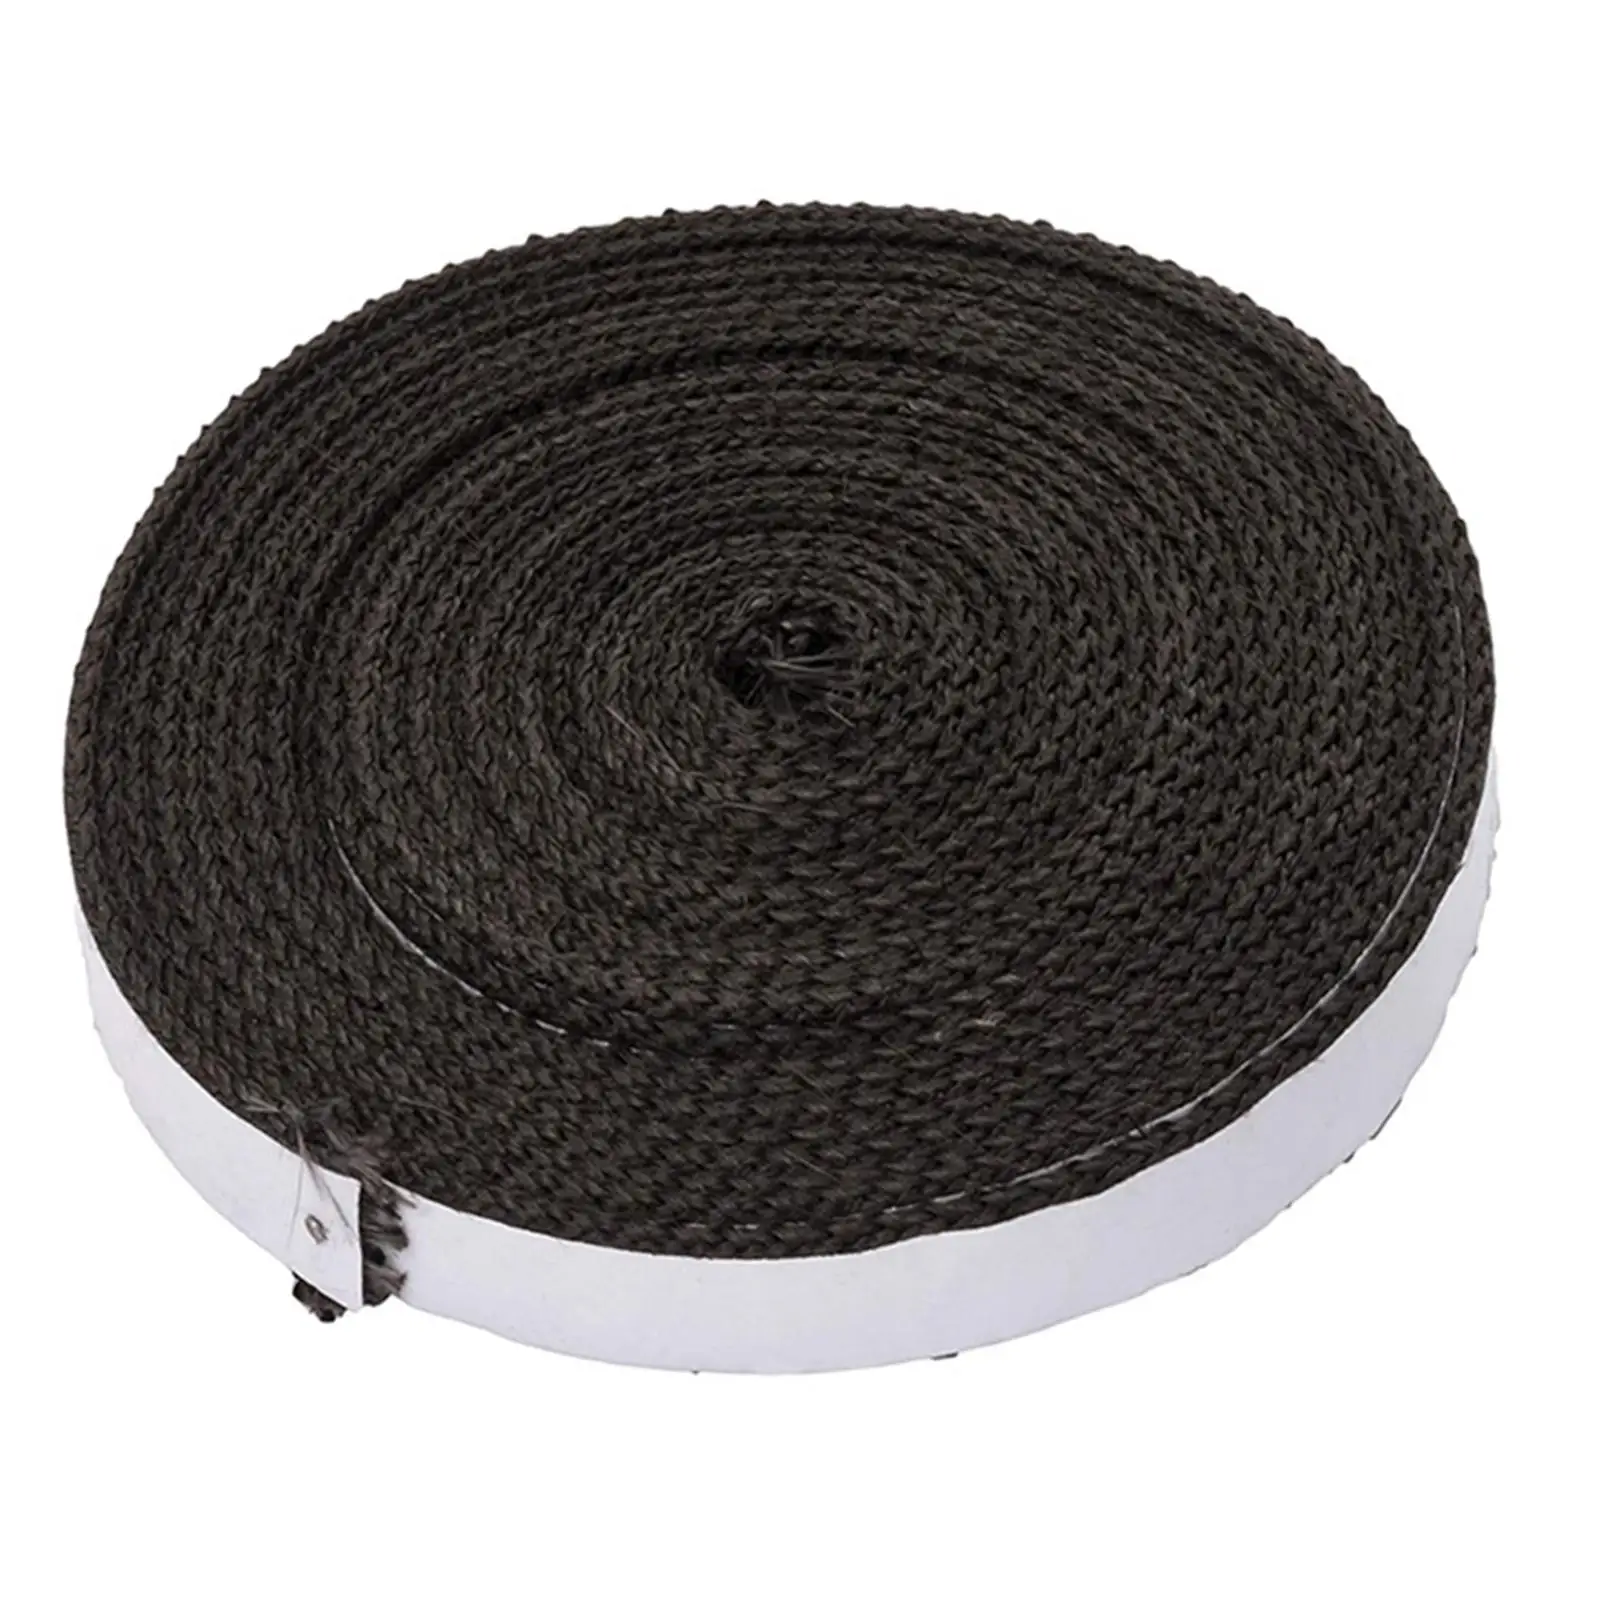 BBQ Gasket Seal Strip Fireproof Barbecue Tape Smoke Keeping Strip Heat Resistant Grill Gasket Accessories Replacement